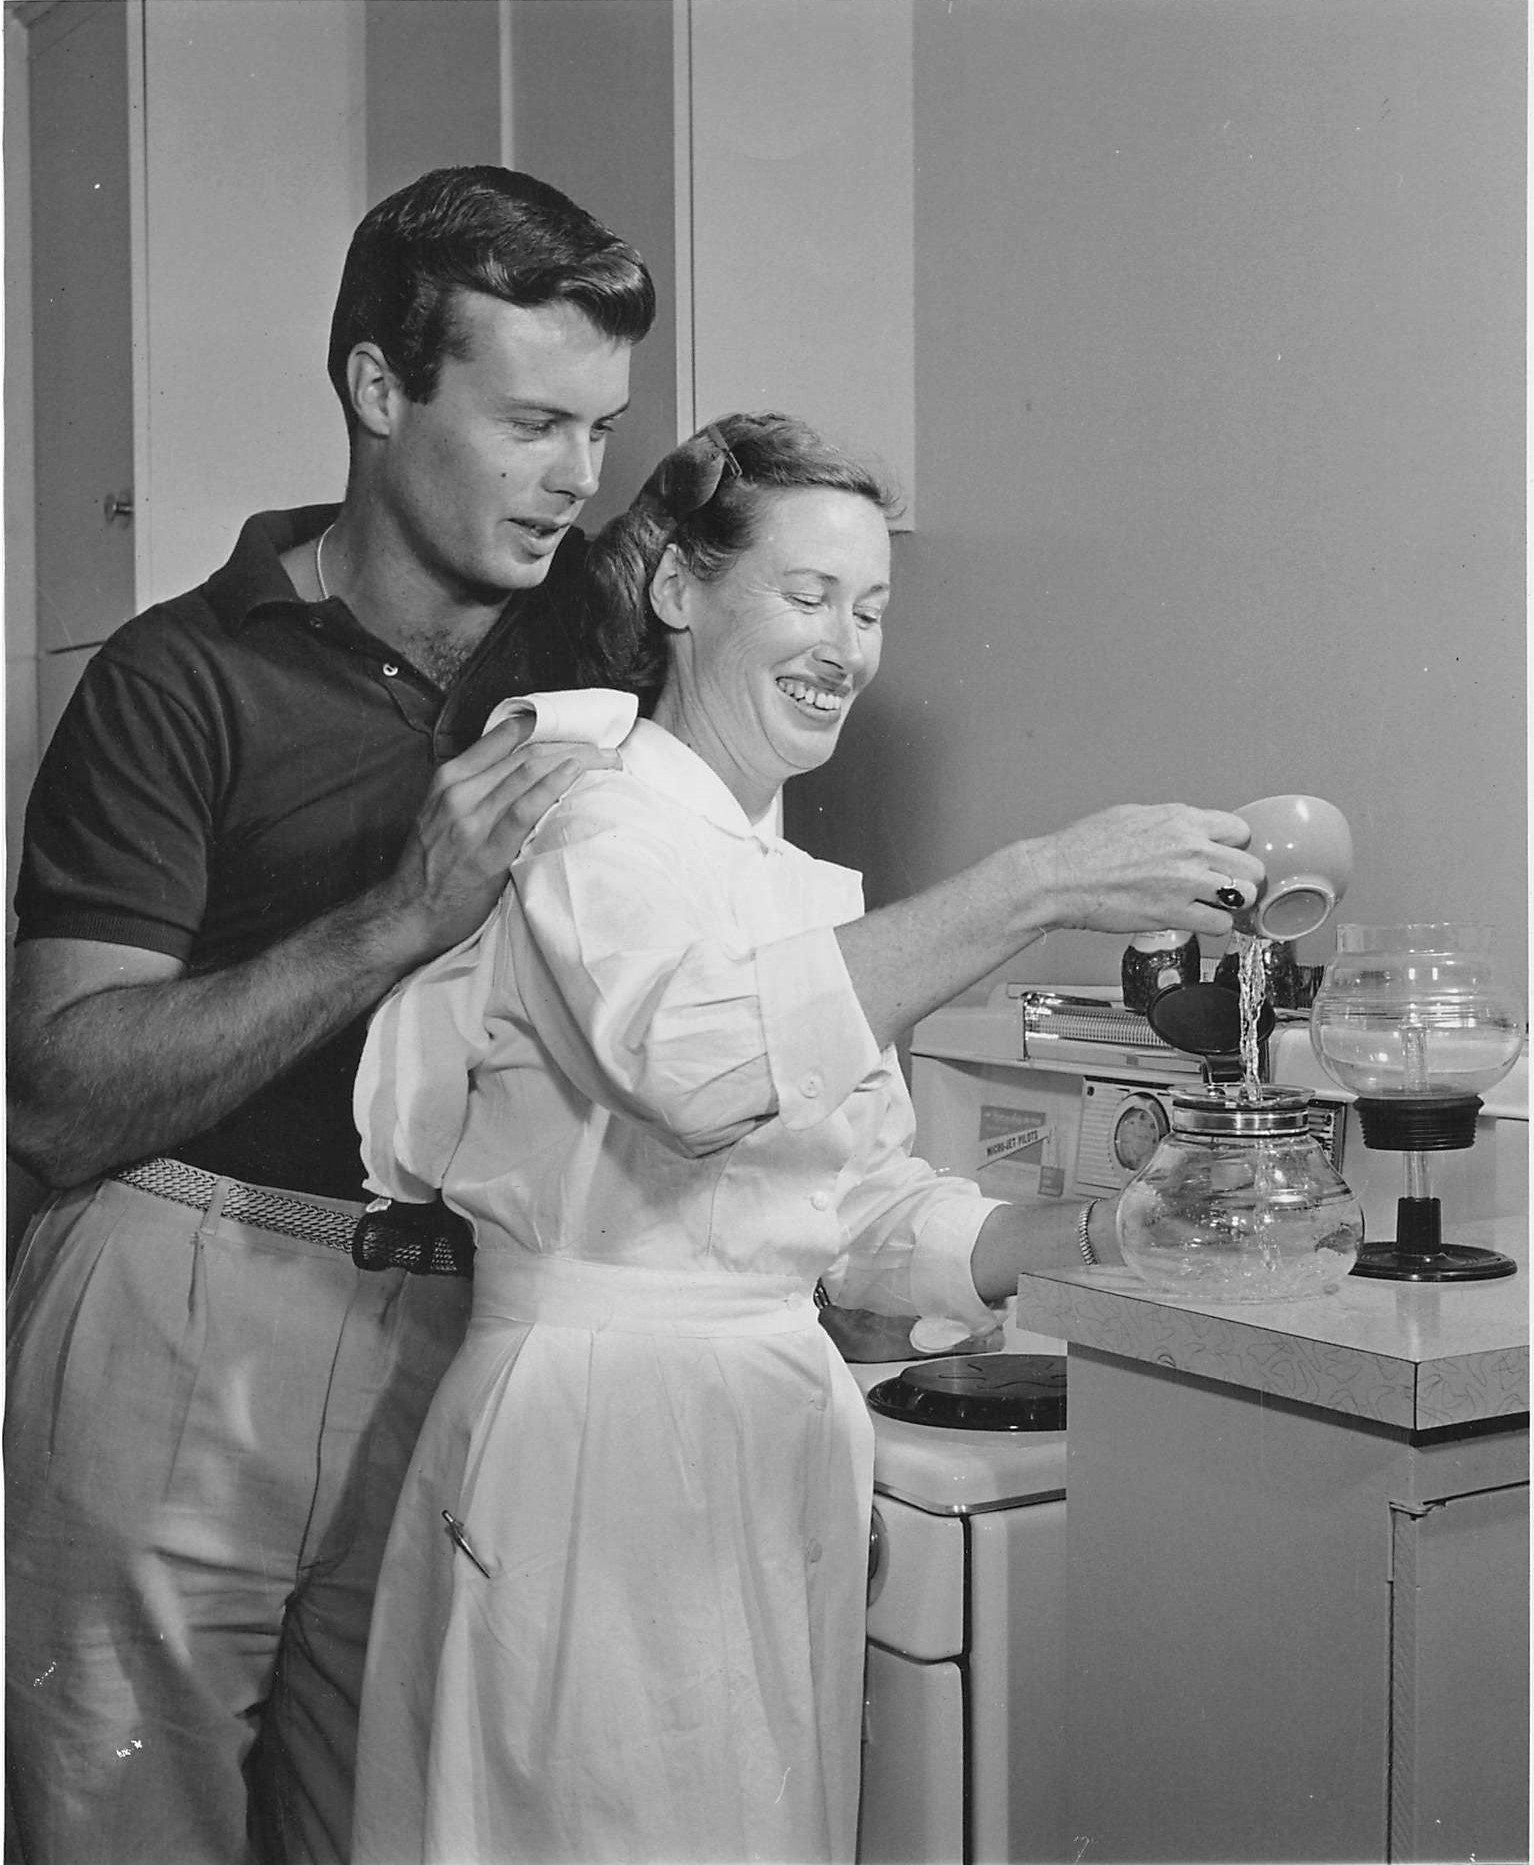  Bob with sister, Lillian, c. 1955  Photo taken in Spring 1955 as part of a “Bob’s new apartment” photo story, e.g., Bob’s sister teaches him how to make his own coffee. Evidently, she came by his apartment on her way to or from her nursing job and f